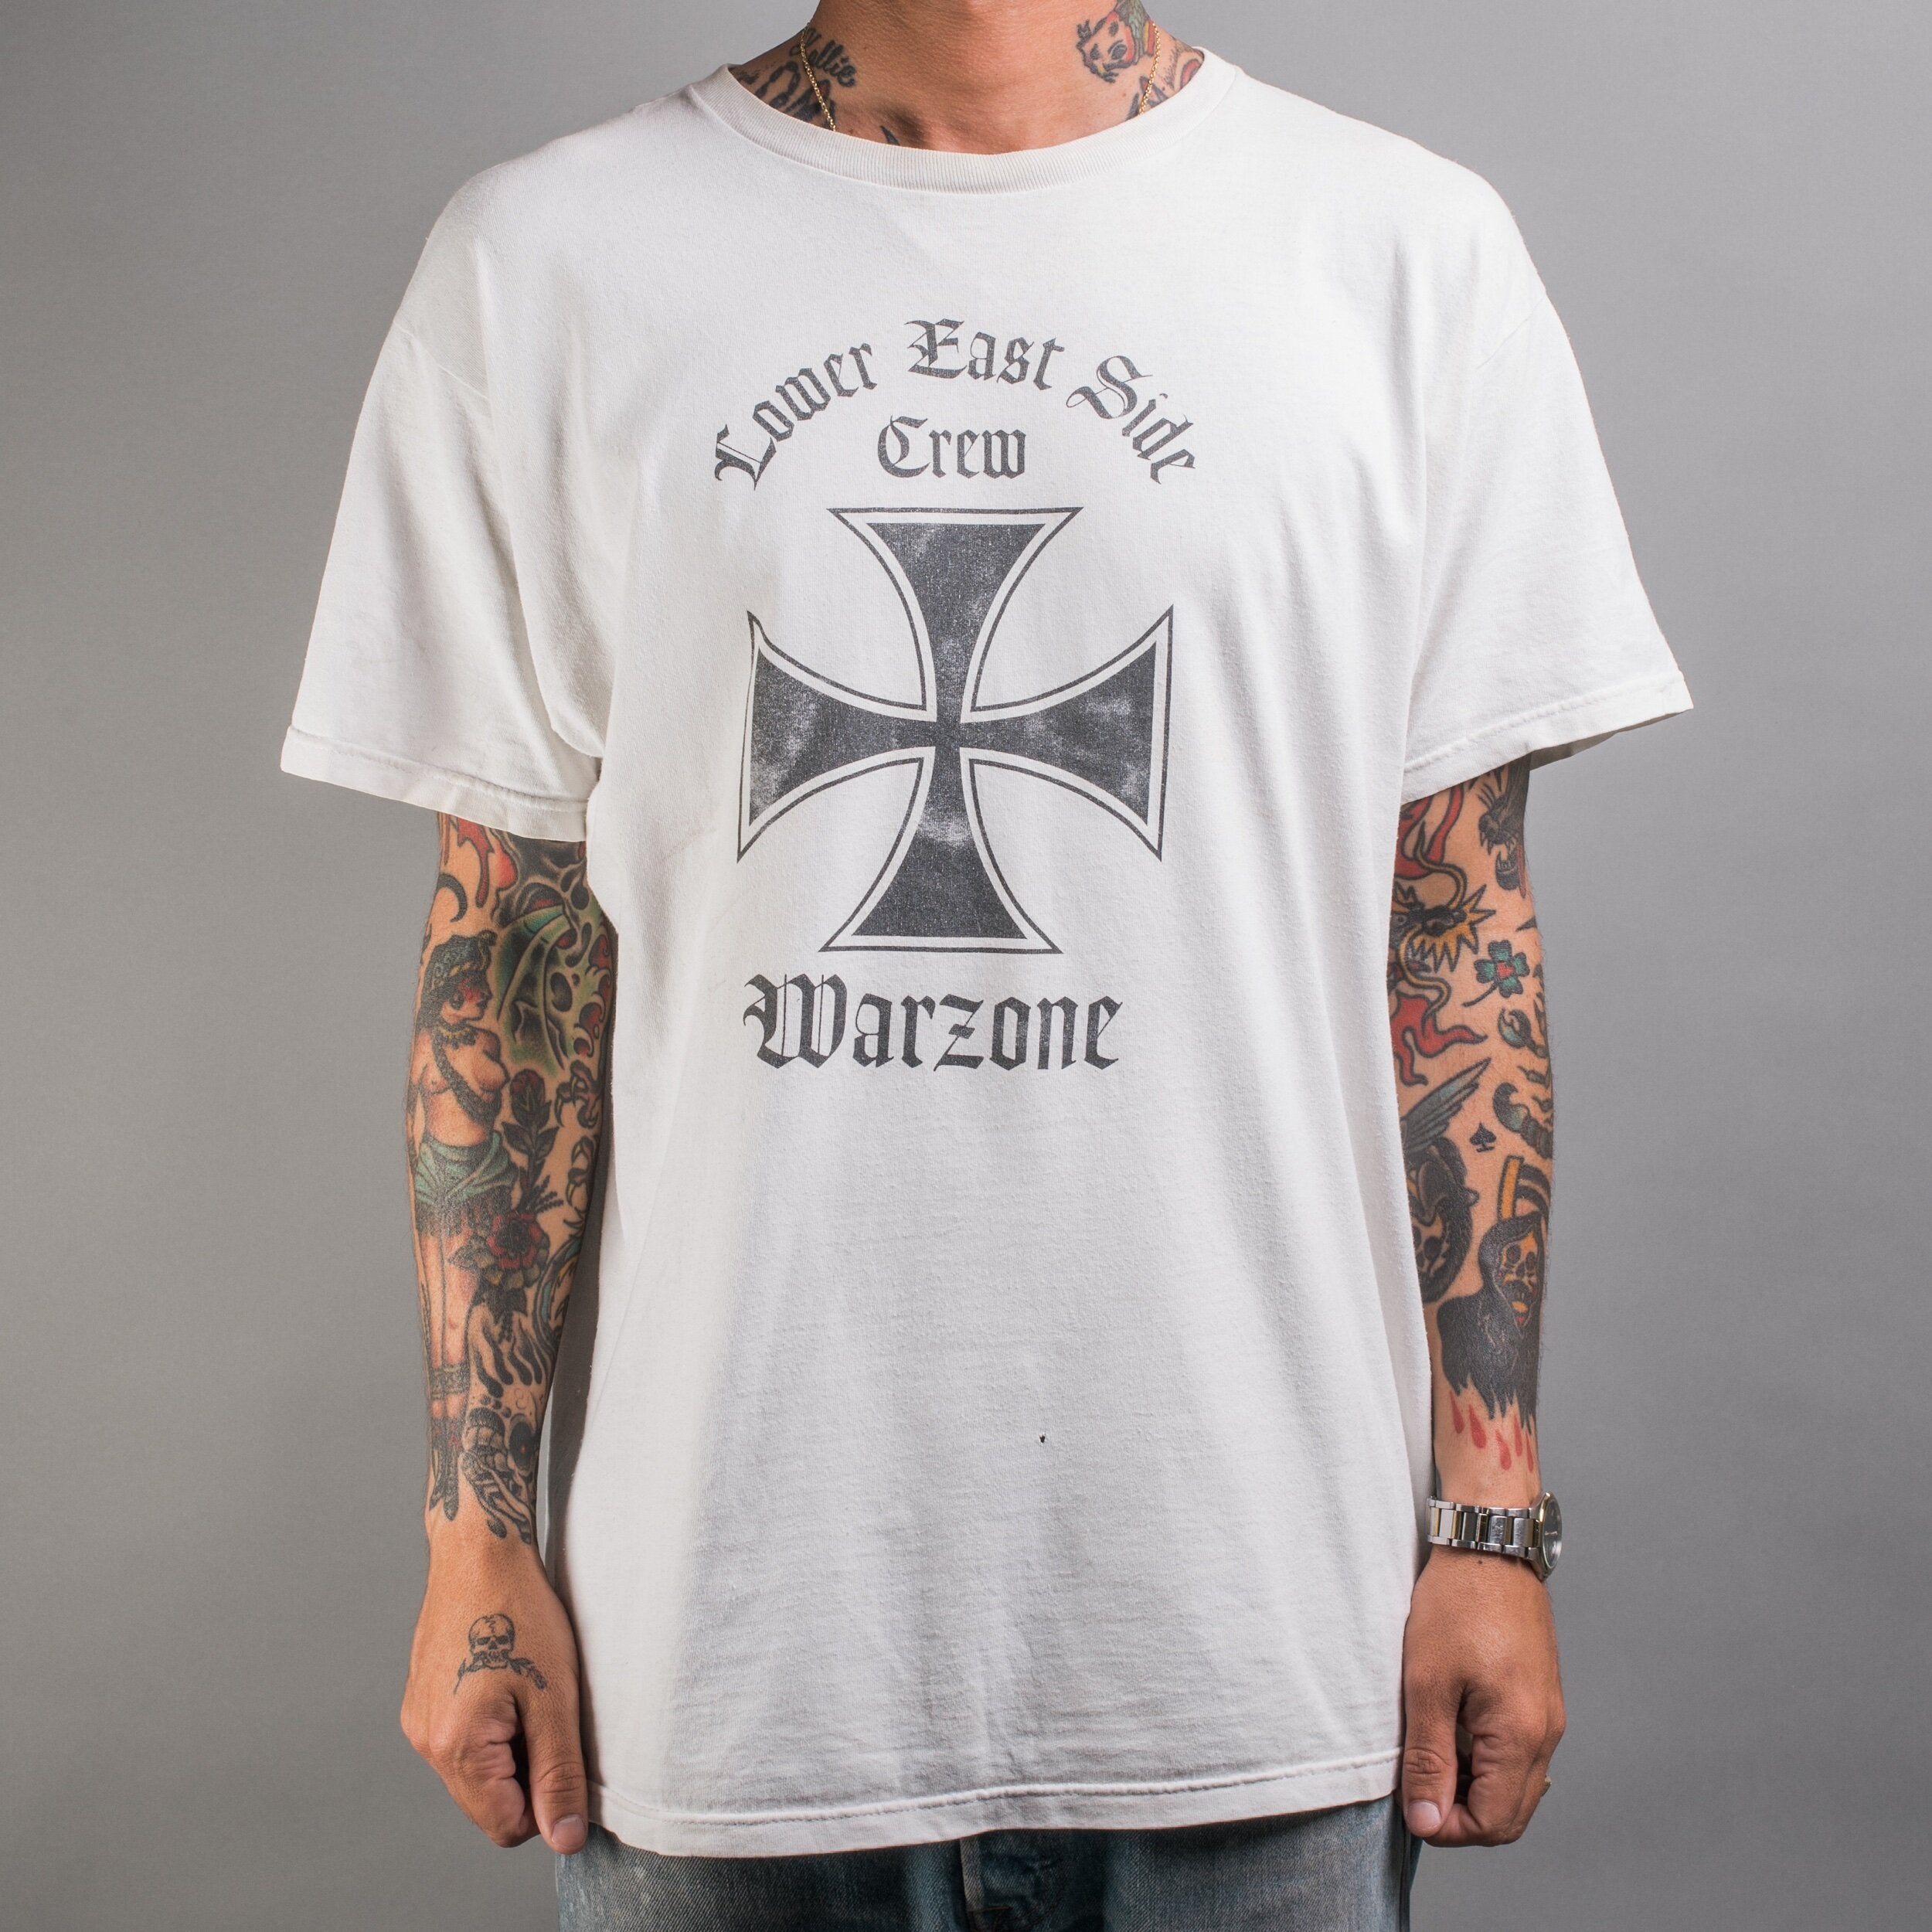 Vintage 90’s Warzone Lower East Side Crew Tour T-Shirt